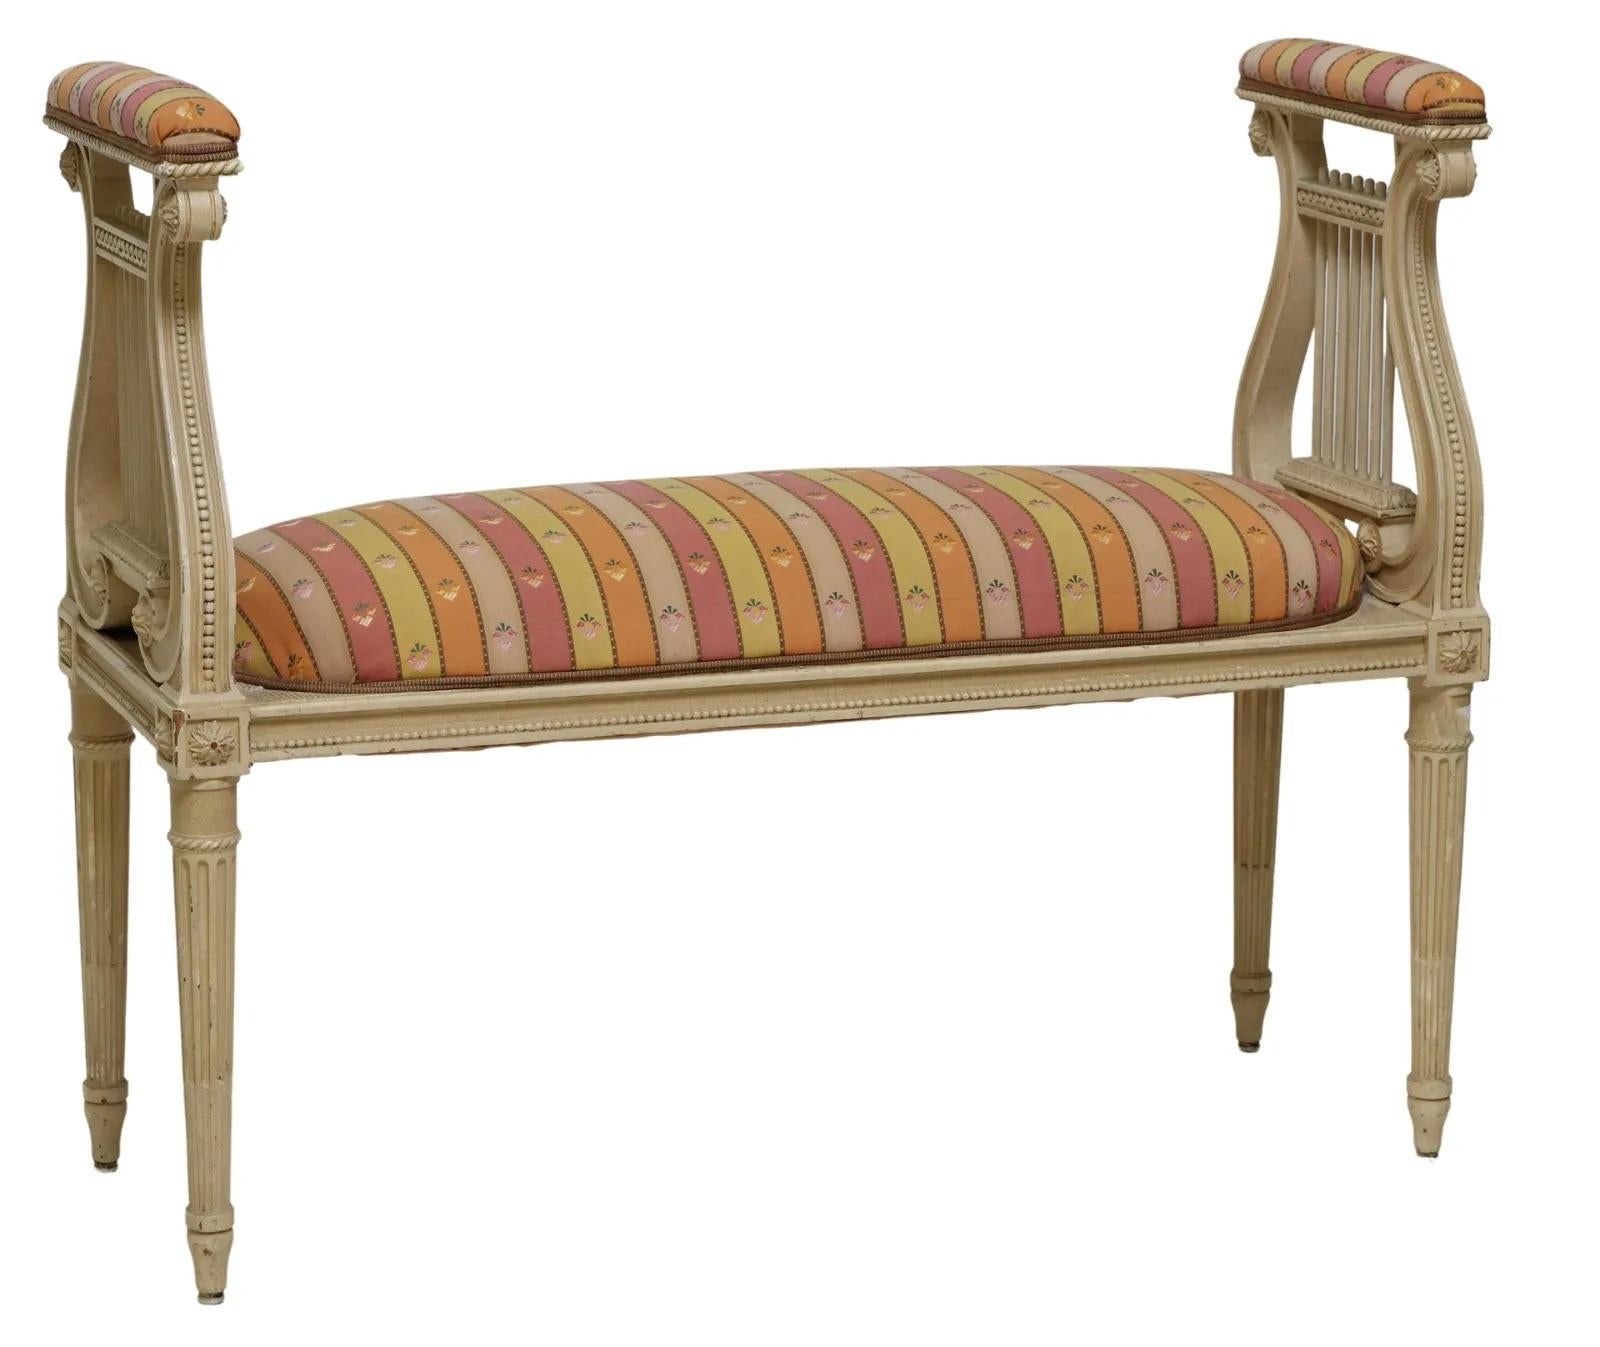 Hand-Crafted Vintage Louis XVI Style Upholstered Painted Lyre Bench For Sale